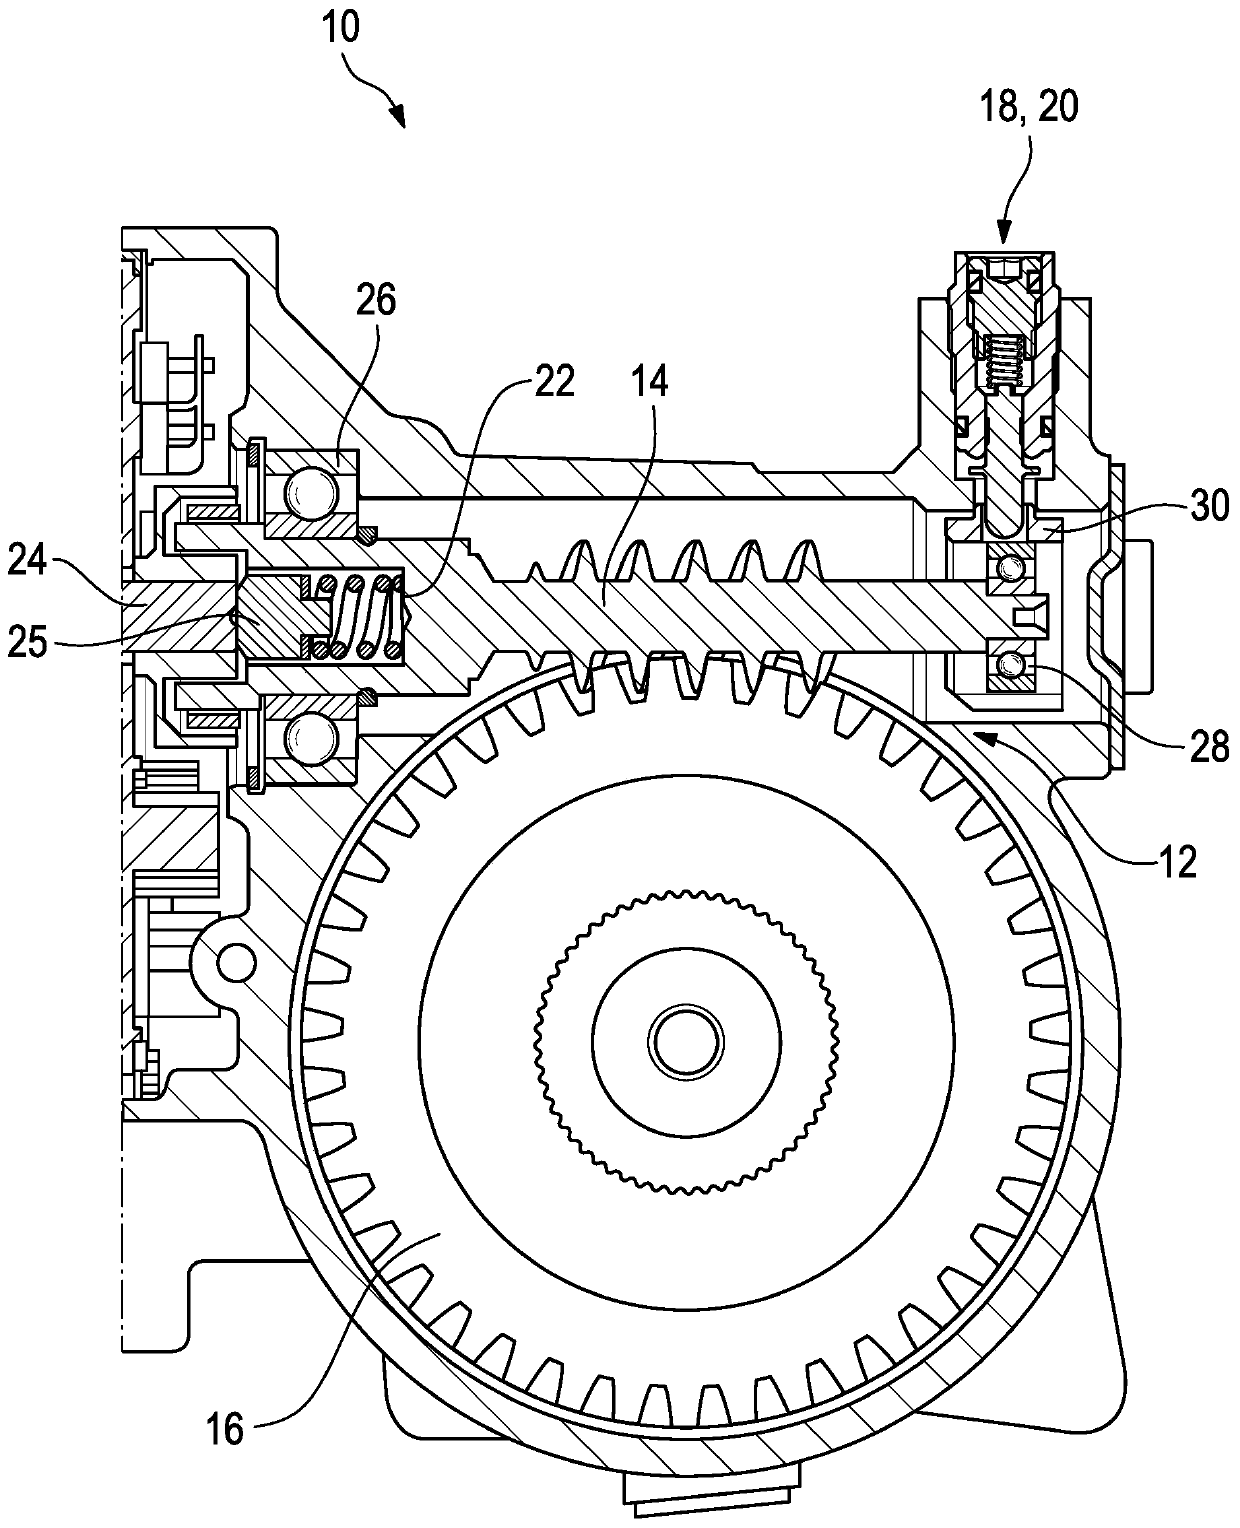 Electric power steering system and method used for generating steering system